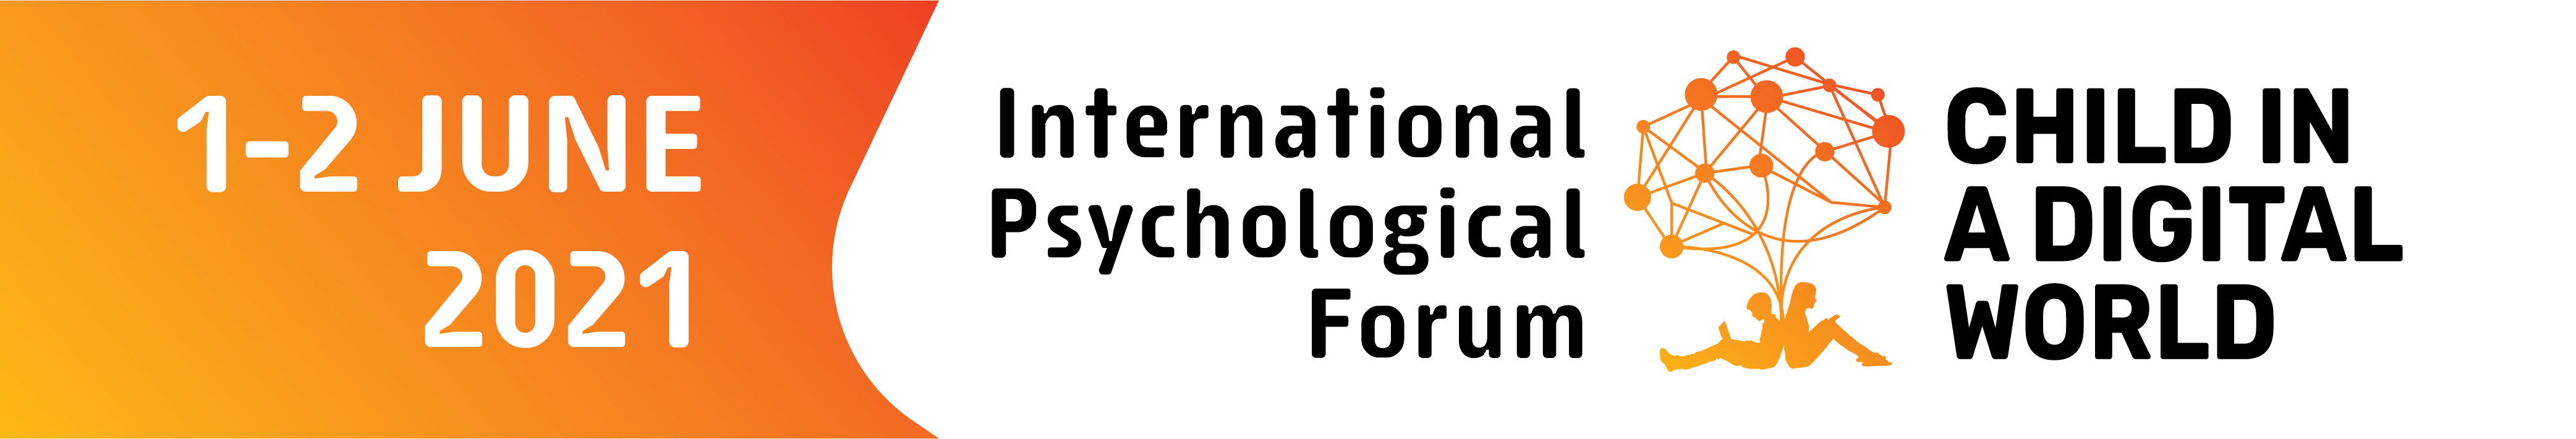 The banner to welcome you to International Psychological Forum